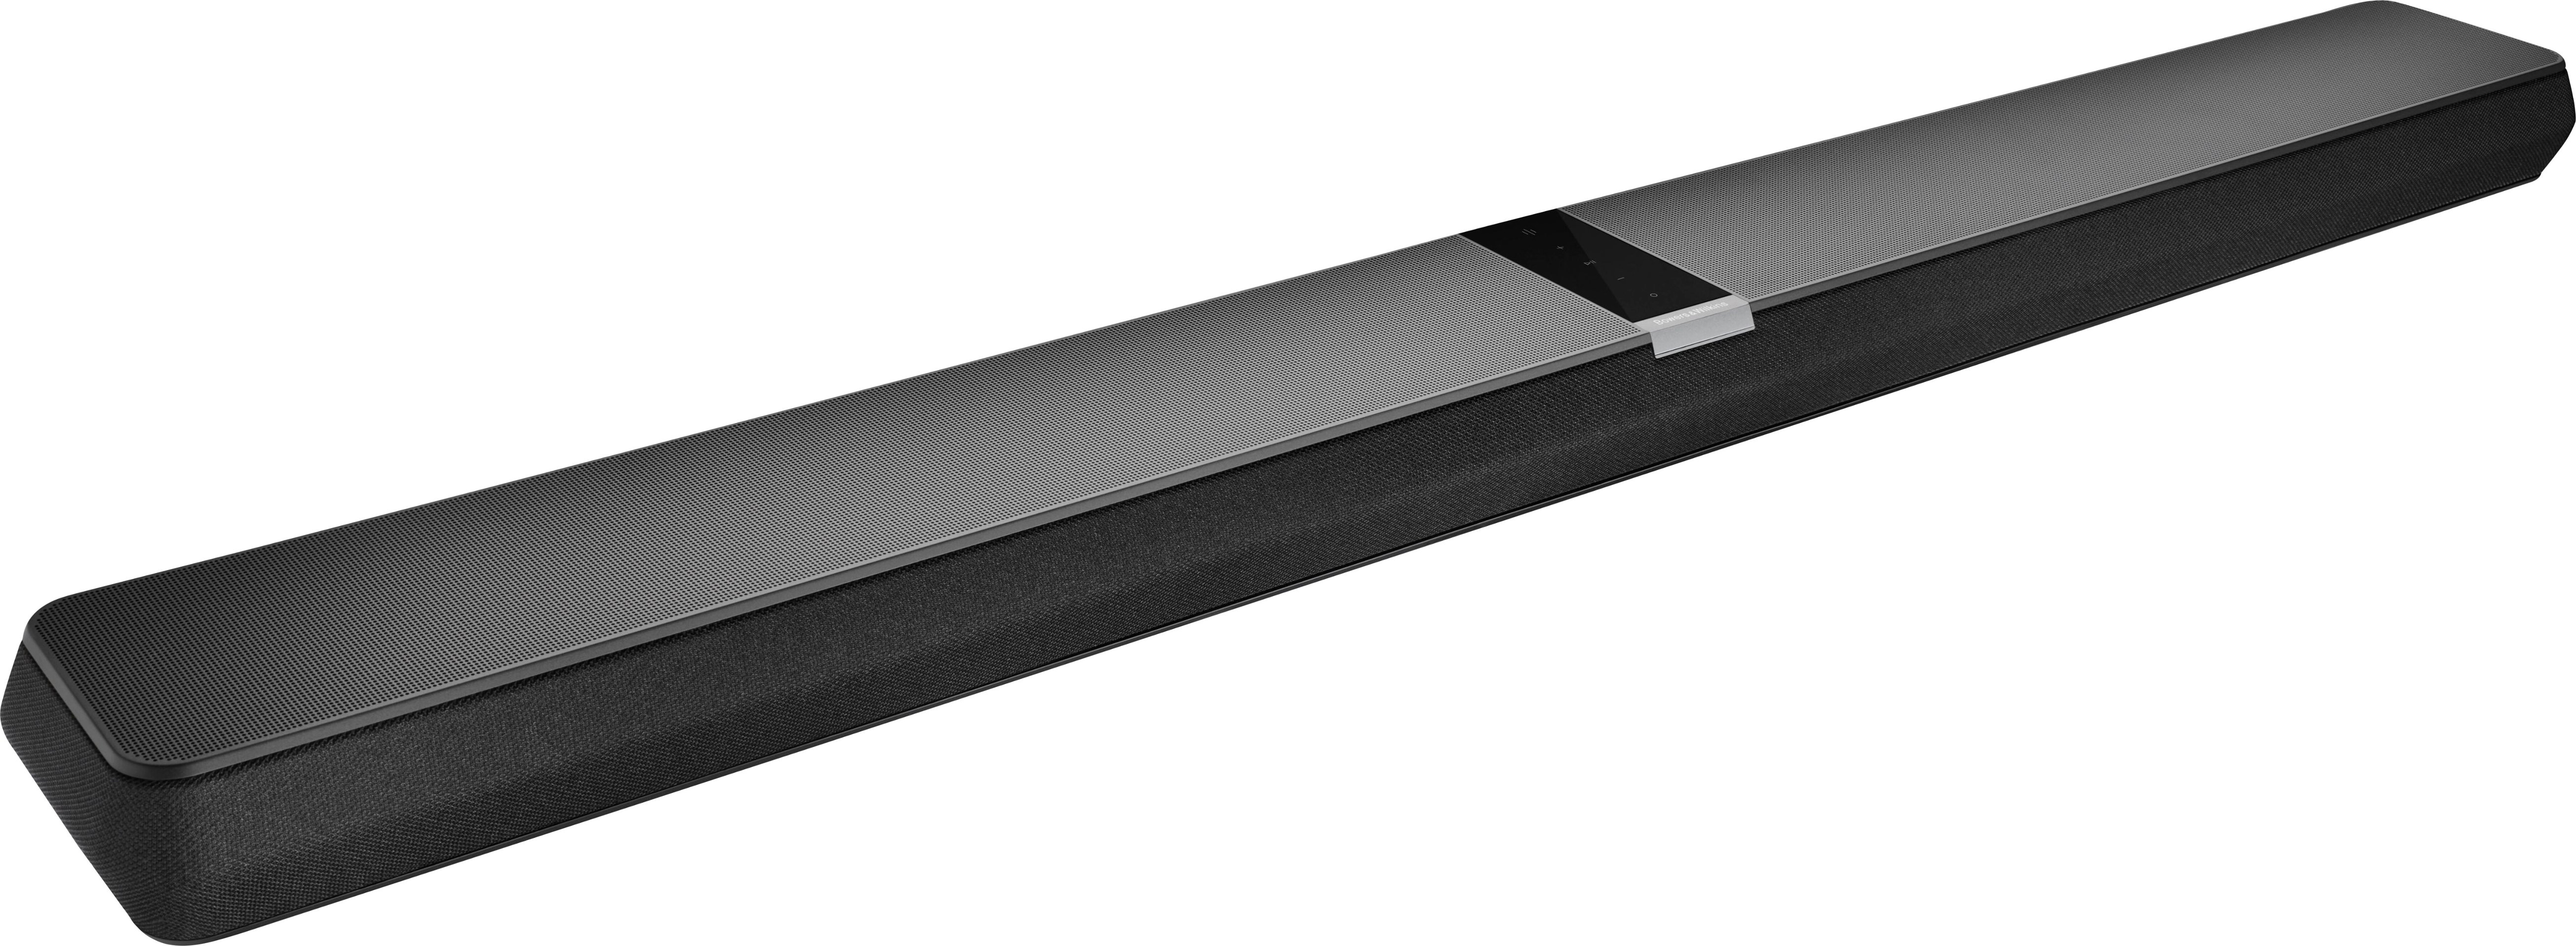 Bowers  Wilkins Panorama 3 Atmos Soundbar with Built-In Subwoofer Black  Panorama3 - Best Buy